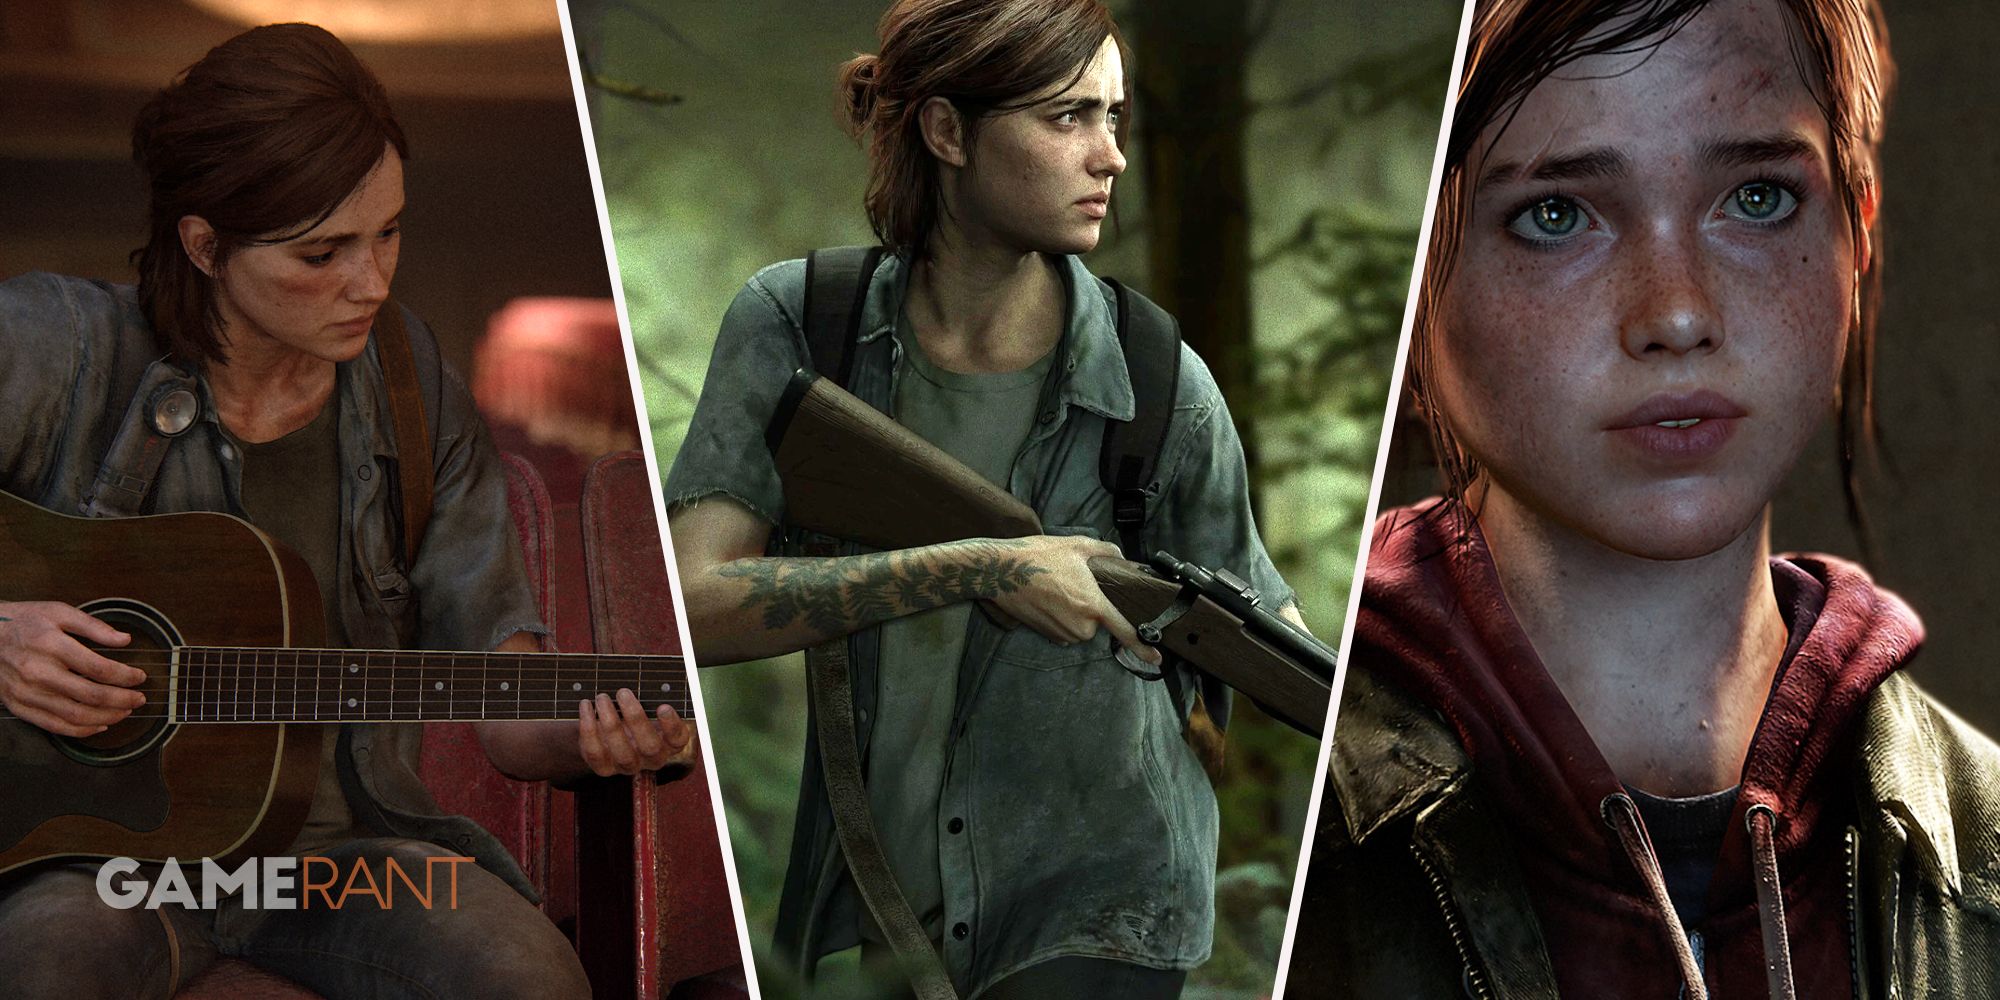 BBC Scotland - The Social - The Last Of Us 2 review - a stunning